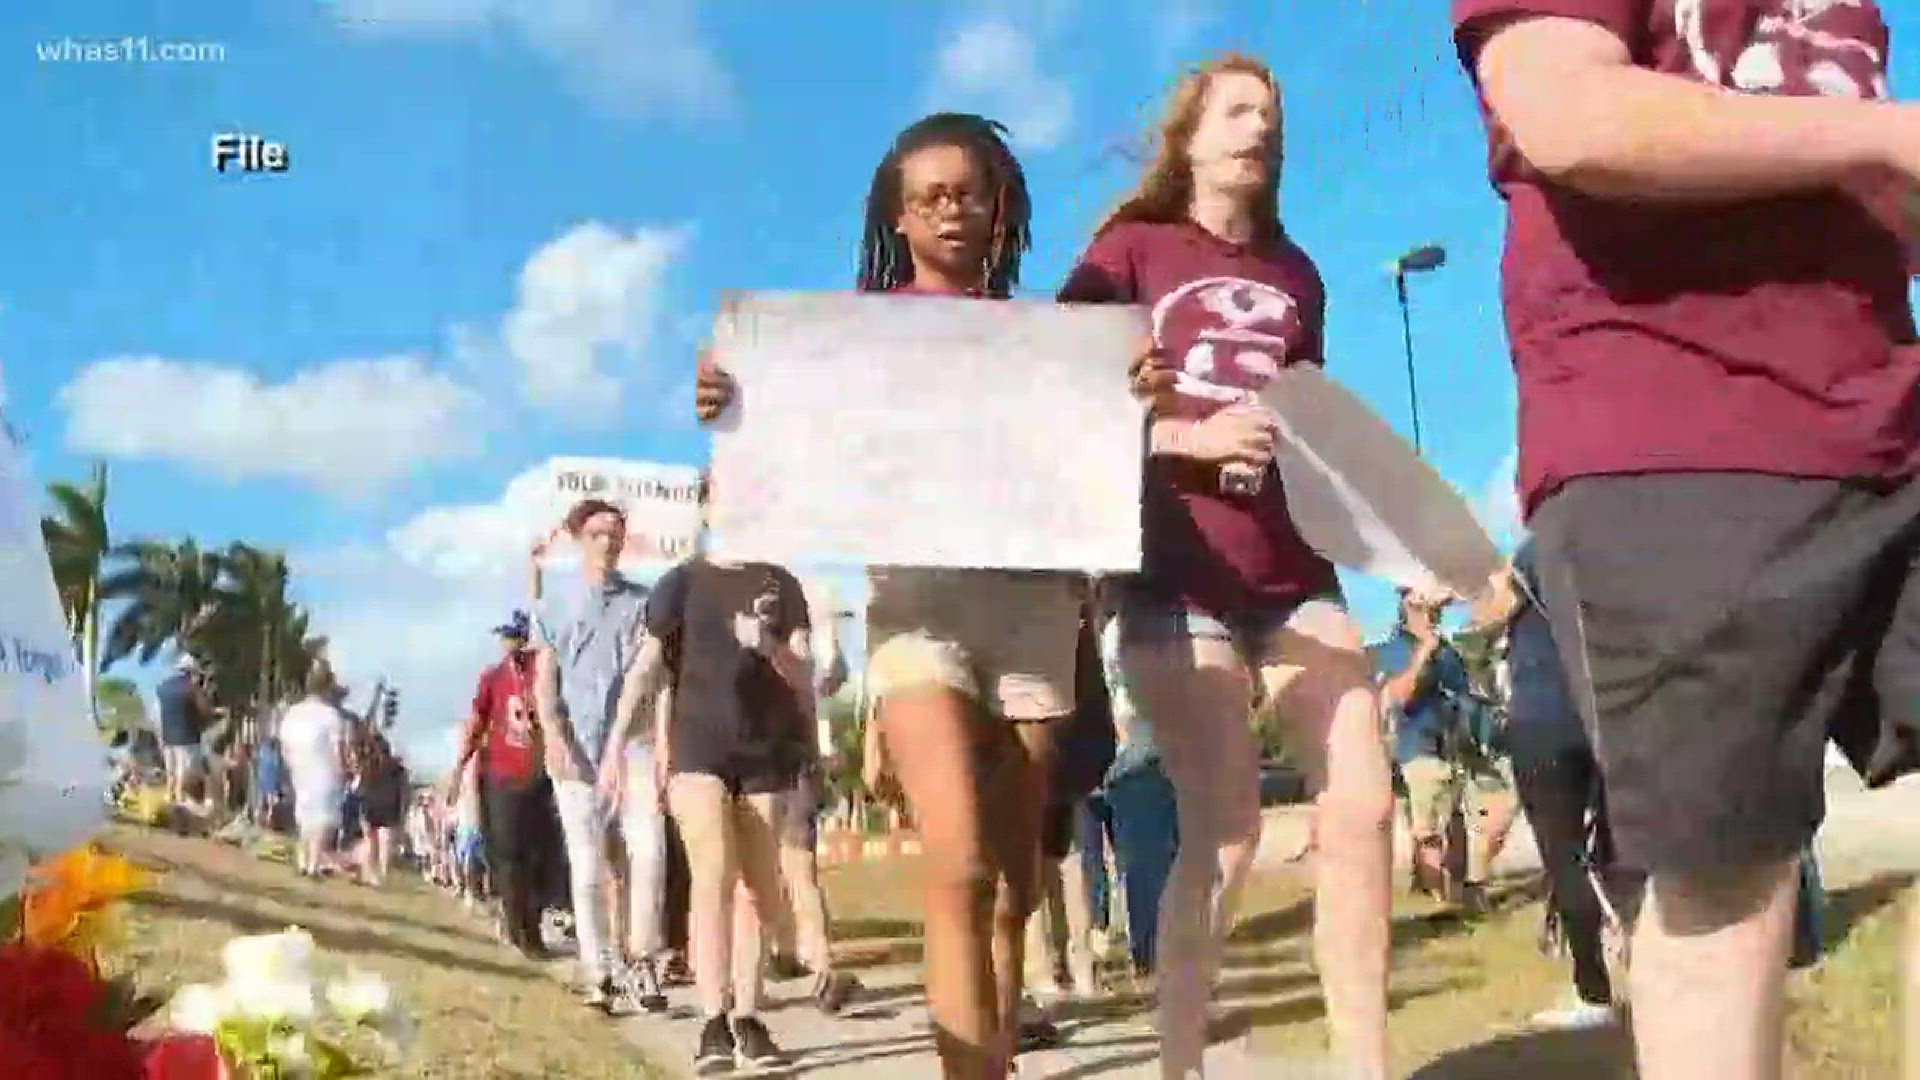 Schools in Oldham Co. offering alternatives to student walkout